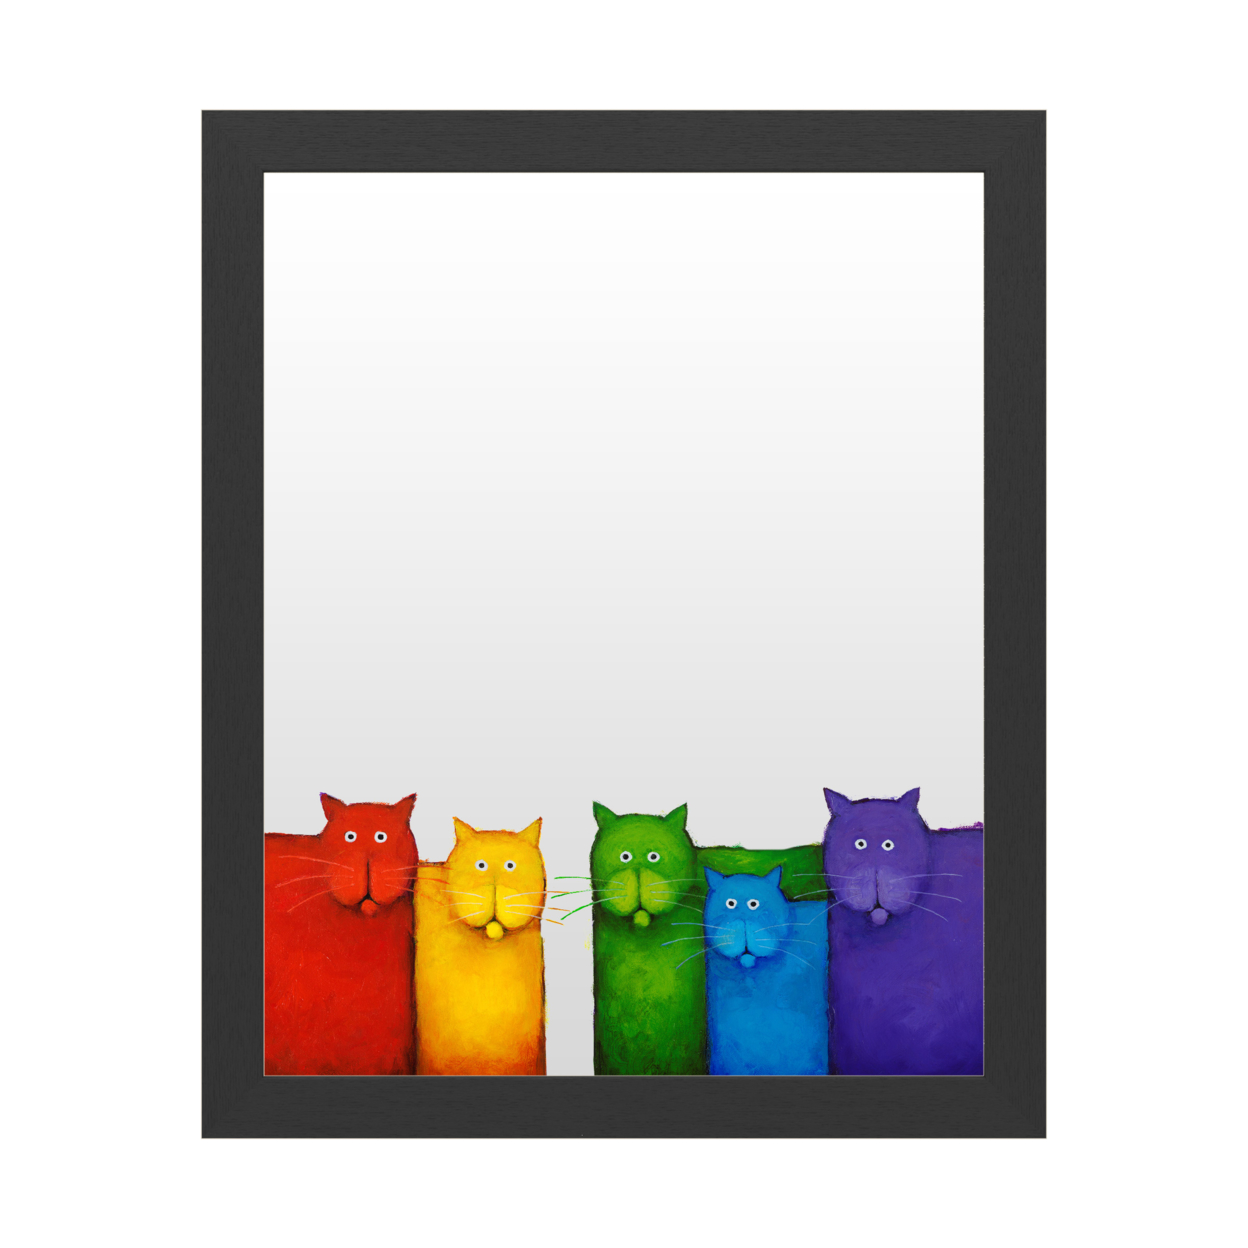 Trademark Global Dry Erase 16 x 20 Marker Board  with Printed Artwork - Daniel Patrick Kessler Rainbow Cats White Board - Ready to Hang